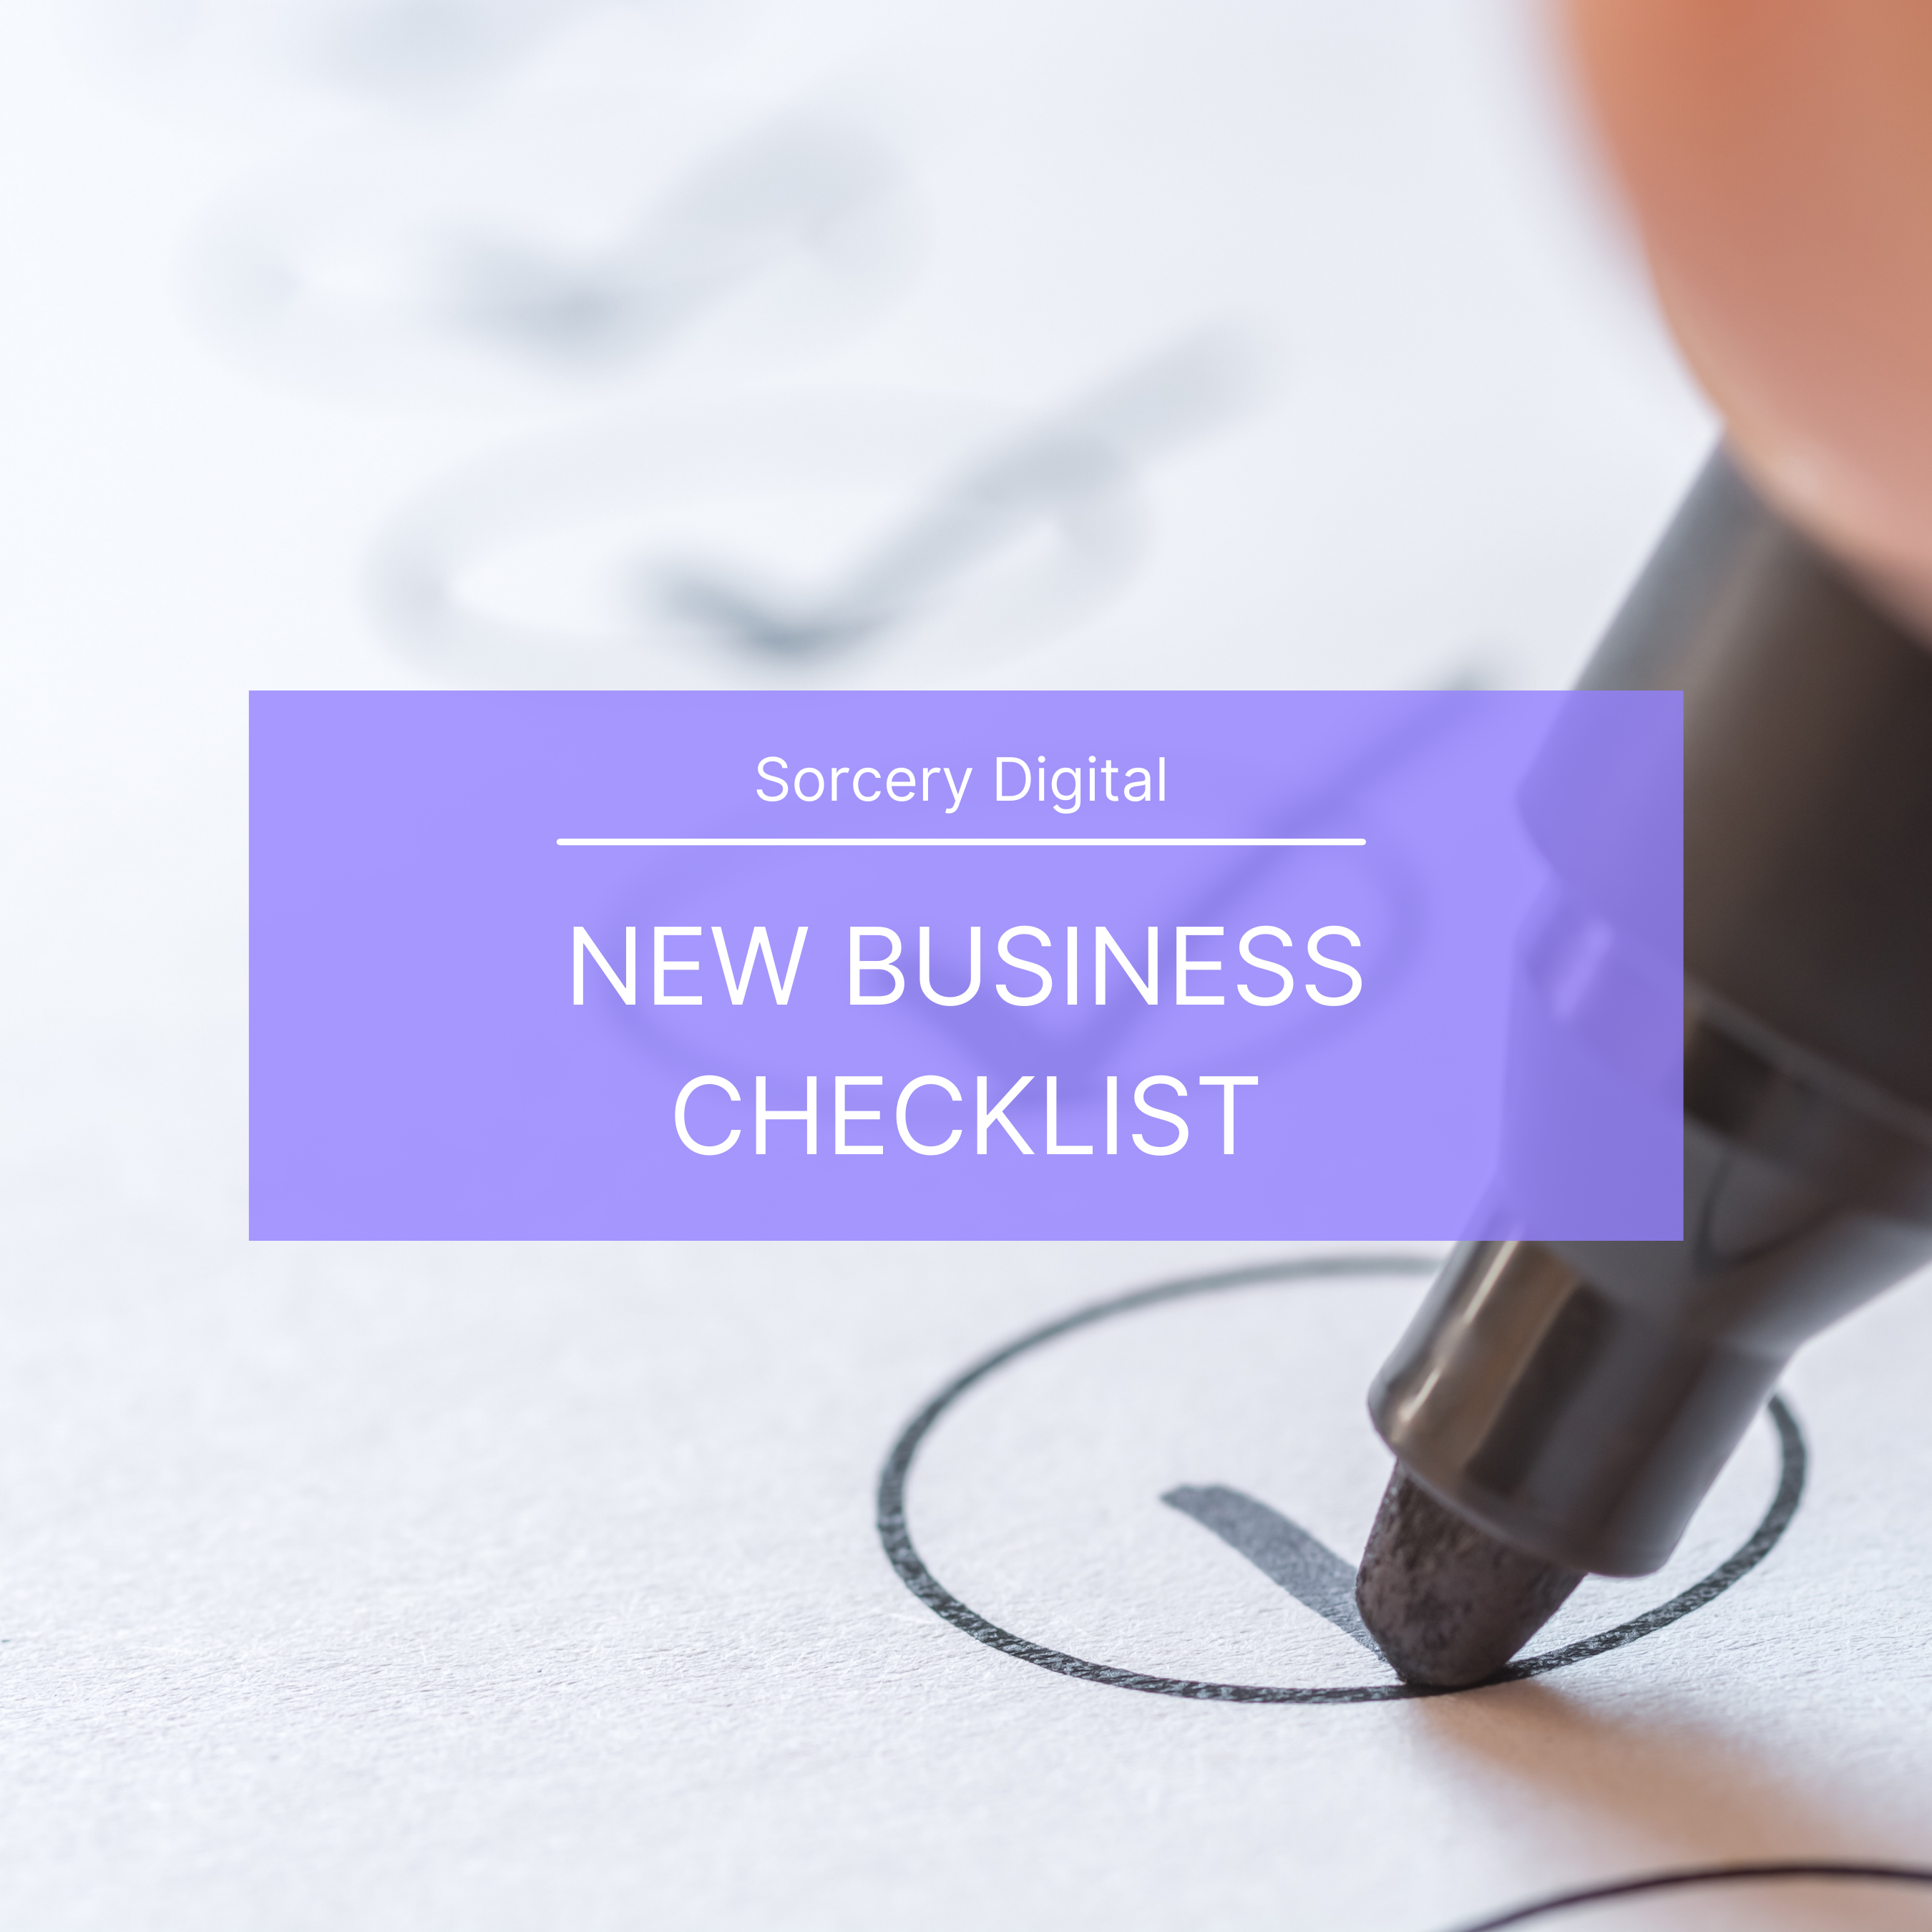 Checklist – Launch An eCommerce Business